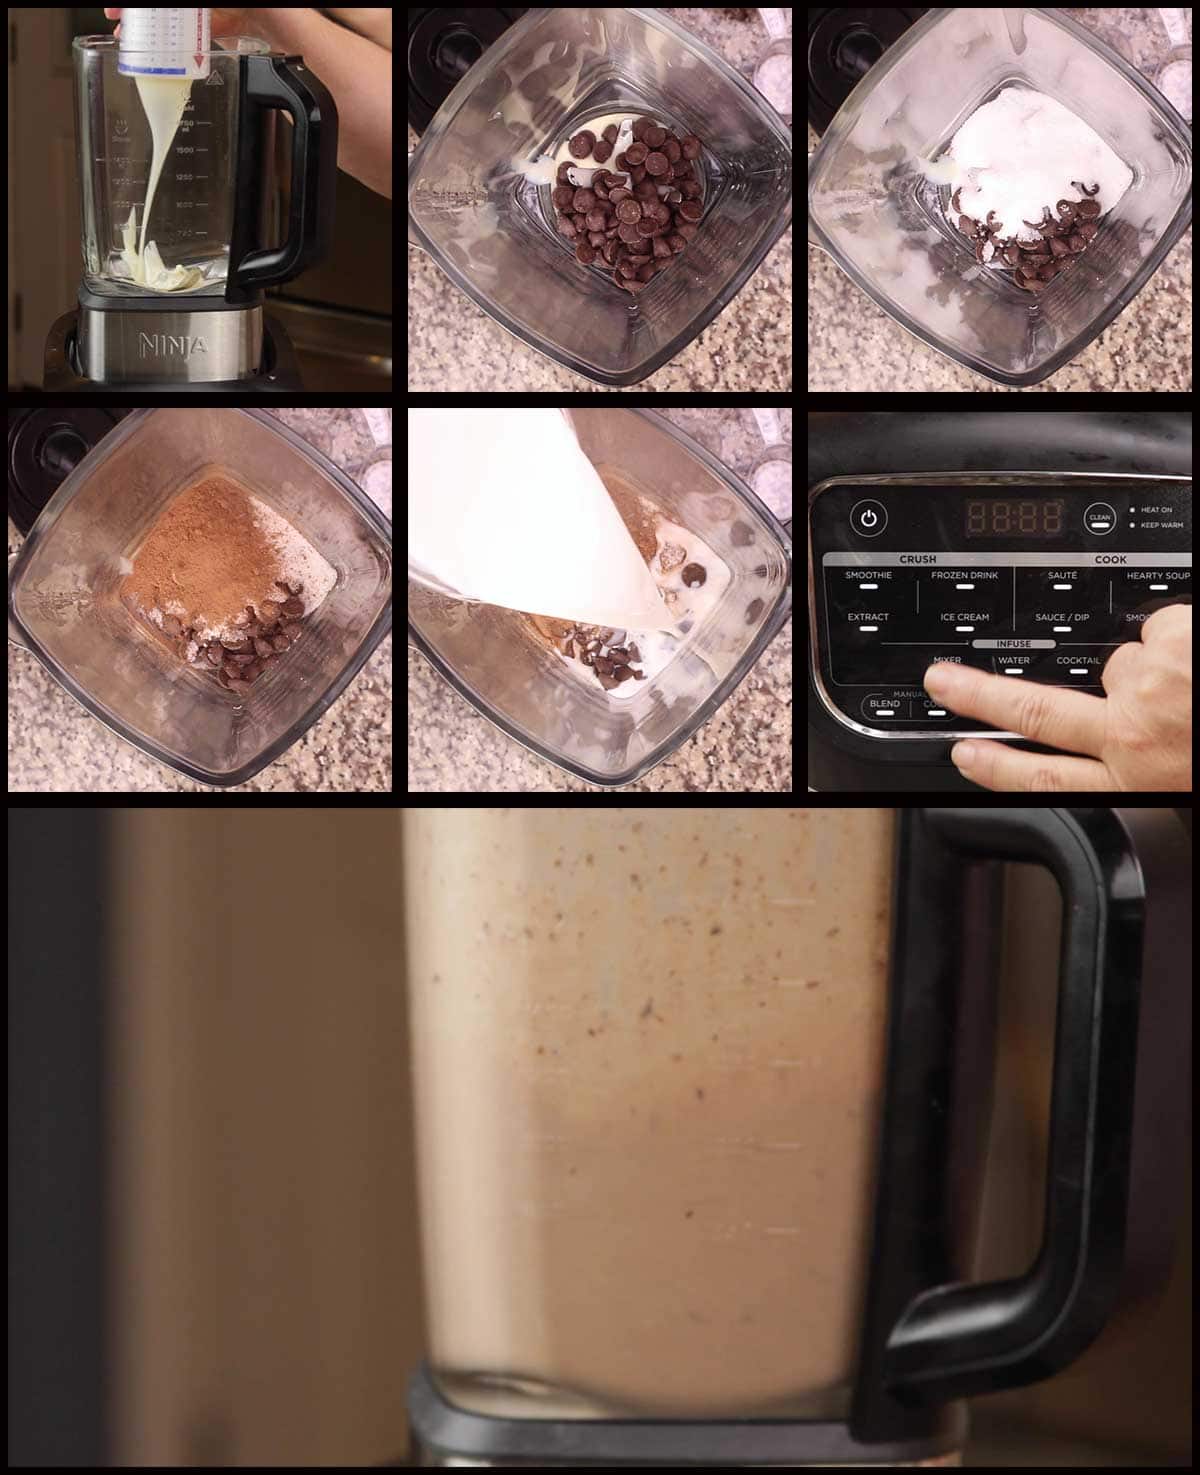 adding the ingredients to the ninja foodi blender for chocolate ice cream and selecting the mixer function